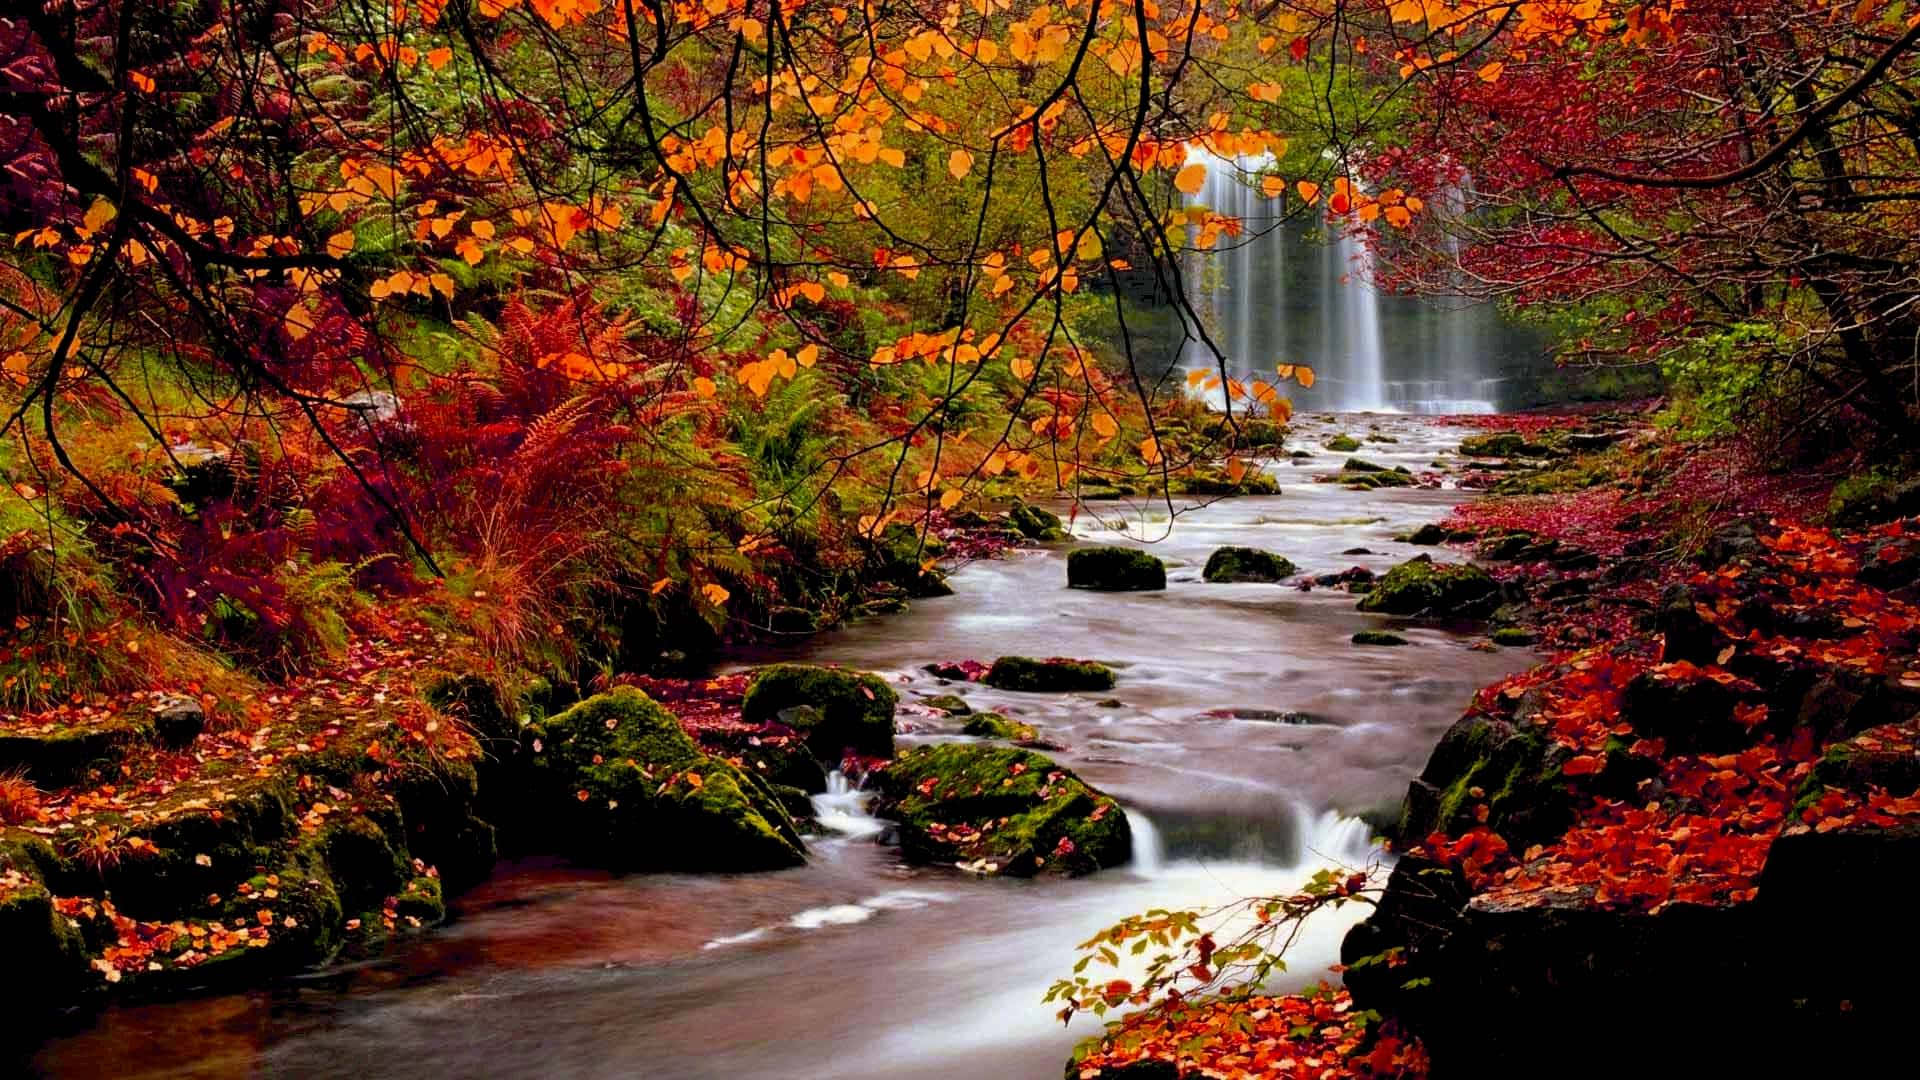 Caption: Autumn Wind Blows through a Colorful Forest Wallpaper